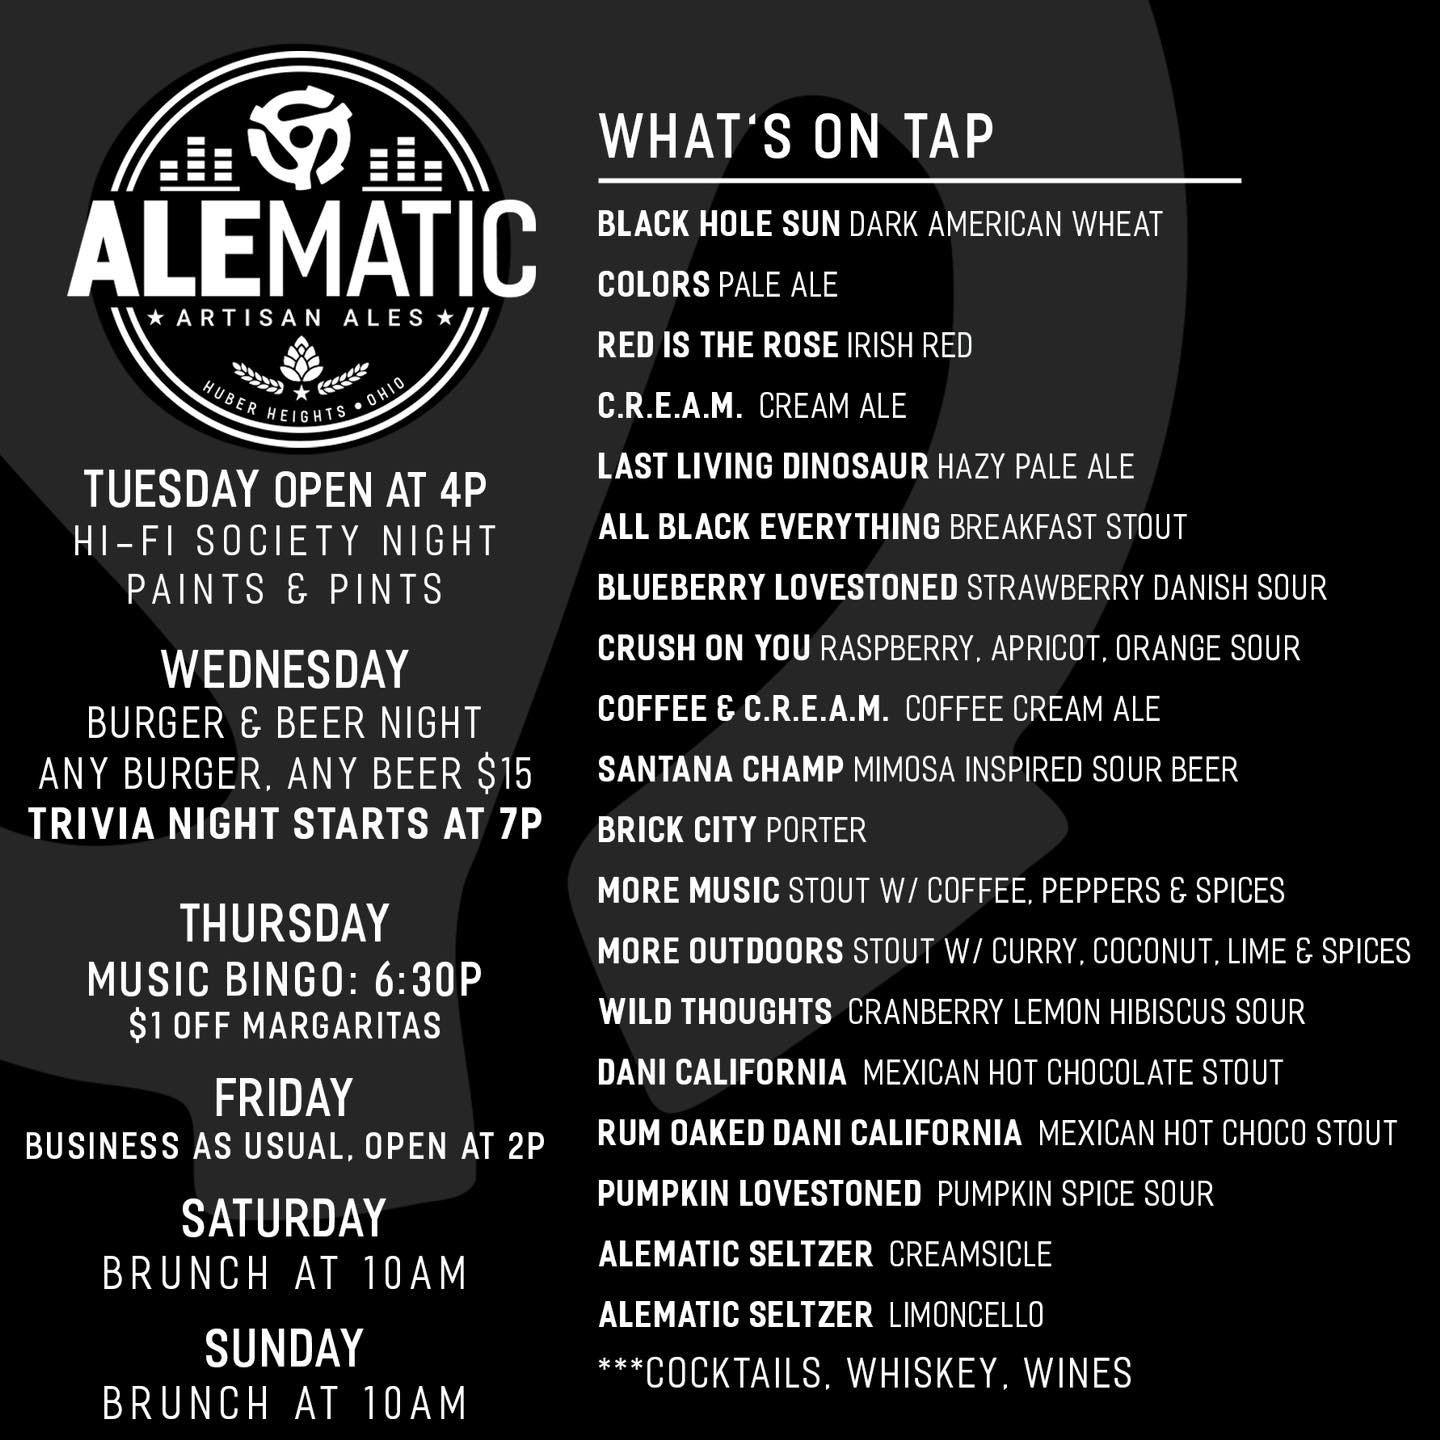 What&rsquo;s on Tap!  Join us this week and enjoy some patio time with your fav Beverage! 

Wed: Burger Night and Trivia
Thurs: Music Bingo
Fri: Open at 2p
Sat: Bunch, open till 10p
Sun: Brunch, open till 5p